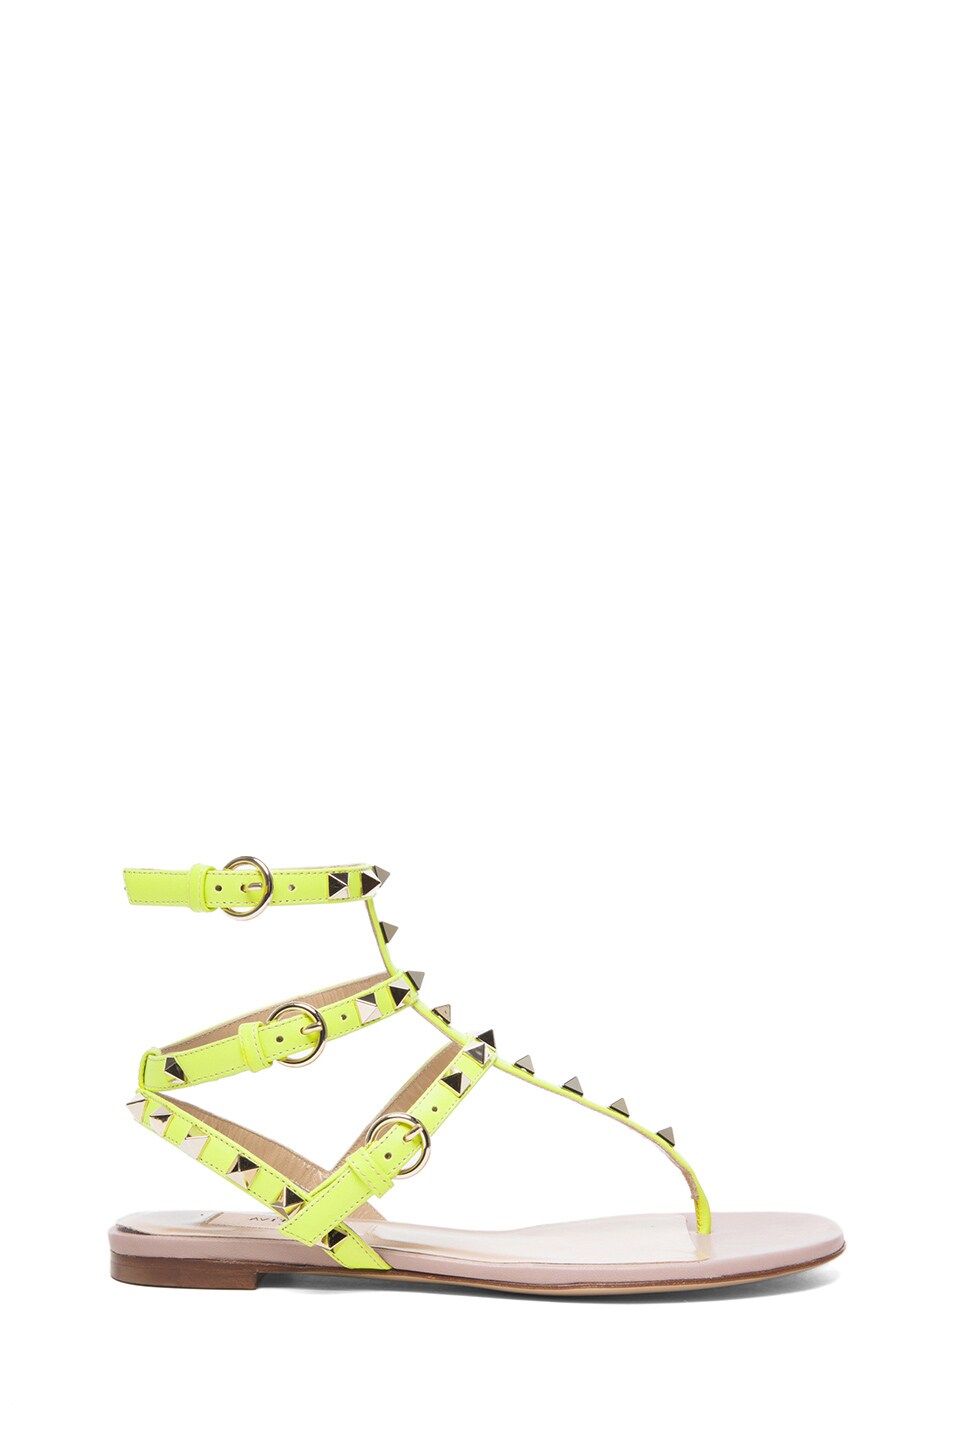 Valentino Rockstud Leather Sandals T.05 in Fluo Yellow | FWRD